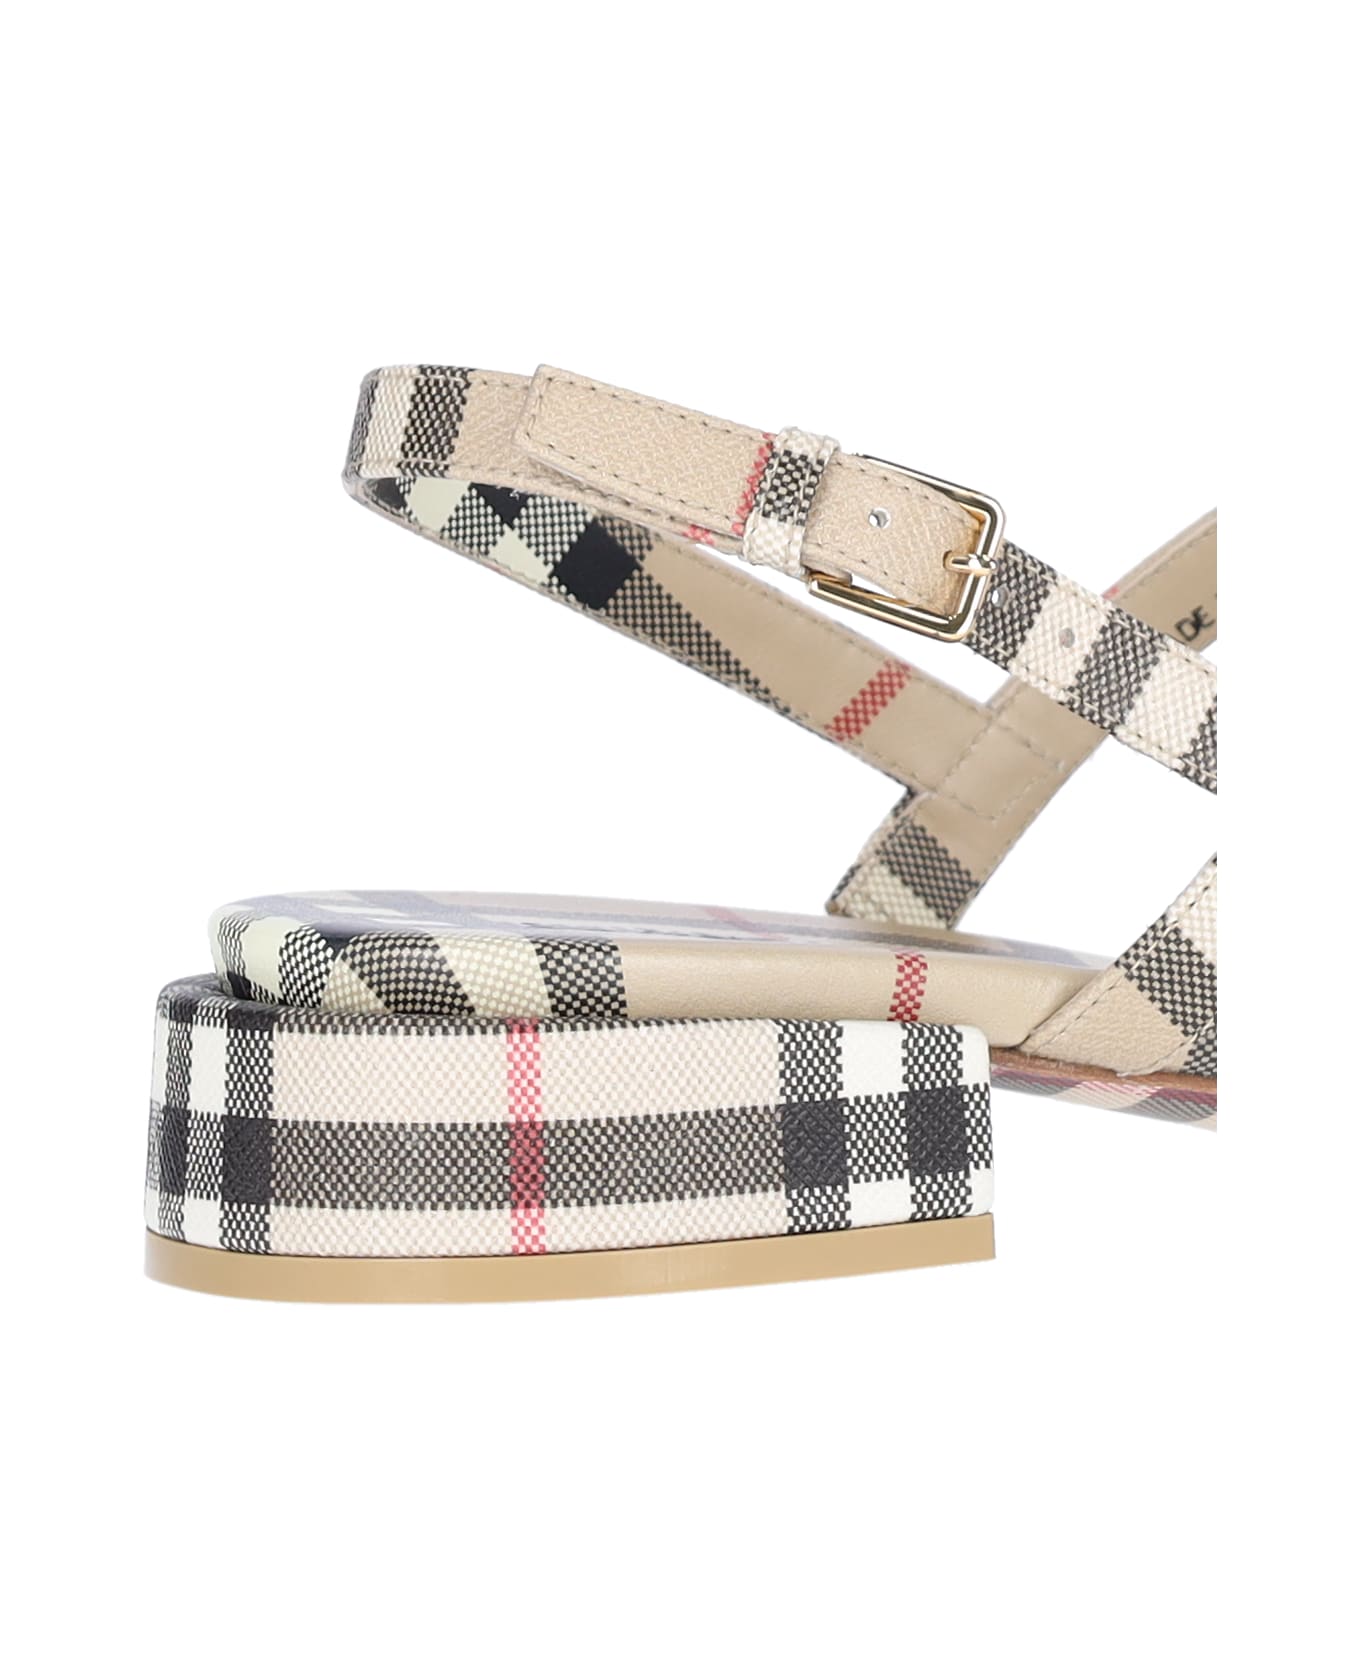 Burberry Beige Sandals With Vintage Check Motif And Short Heel In Canvas Woman - Beige